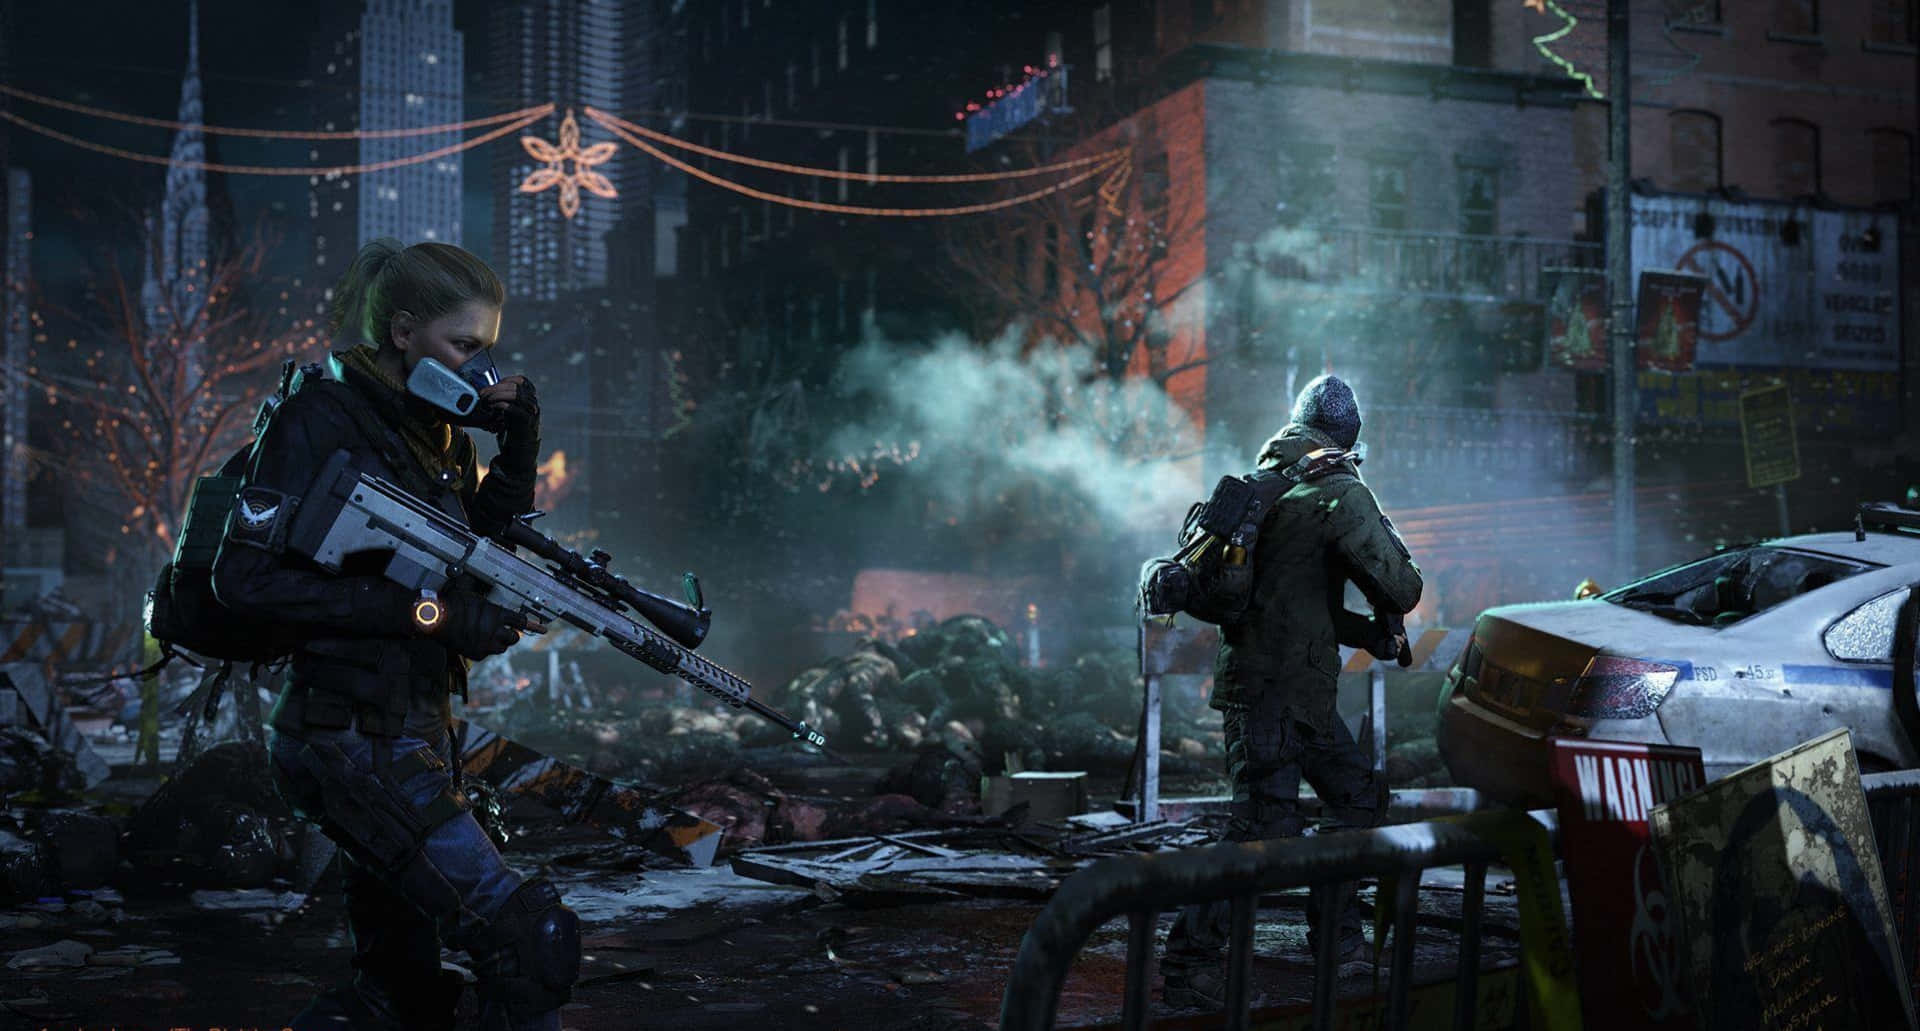 Take the Fight to the Streets in The Division Desktop Wallpaper